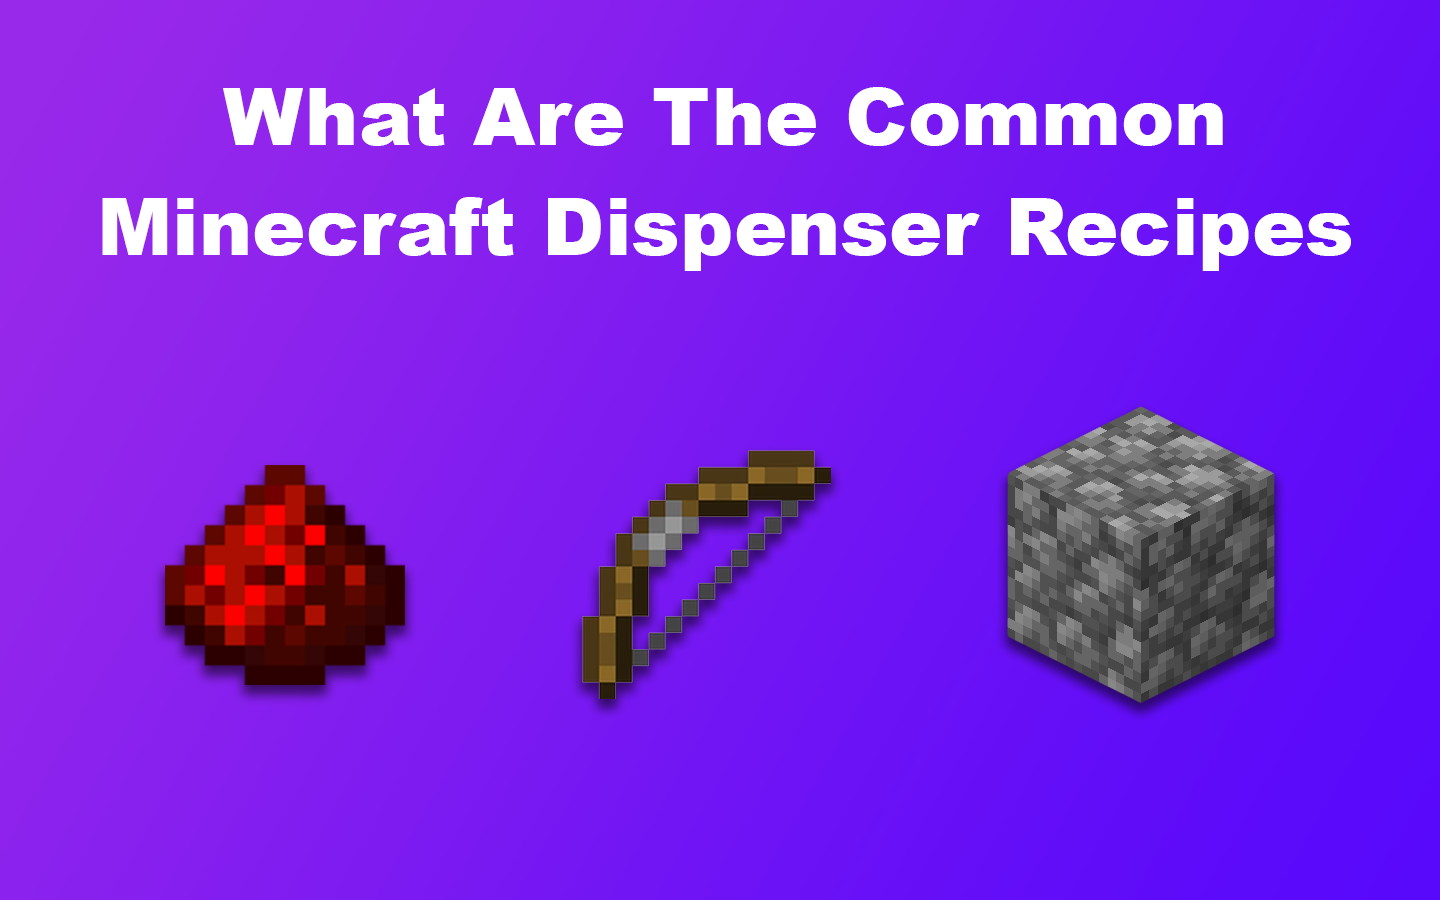 What Are The Common Minecraft Dispenser Recipes